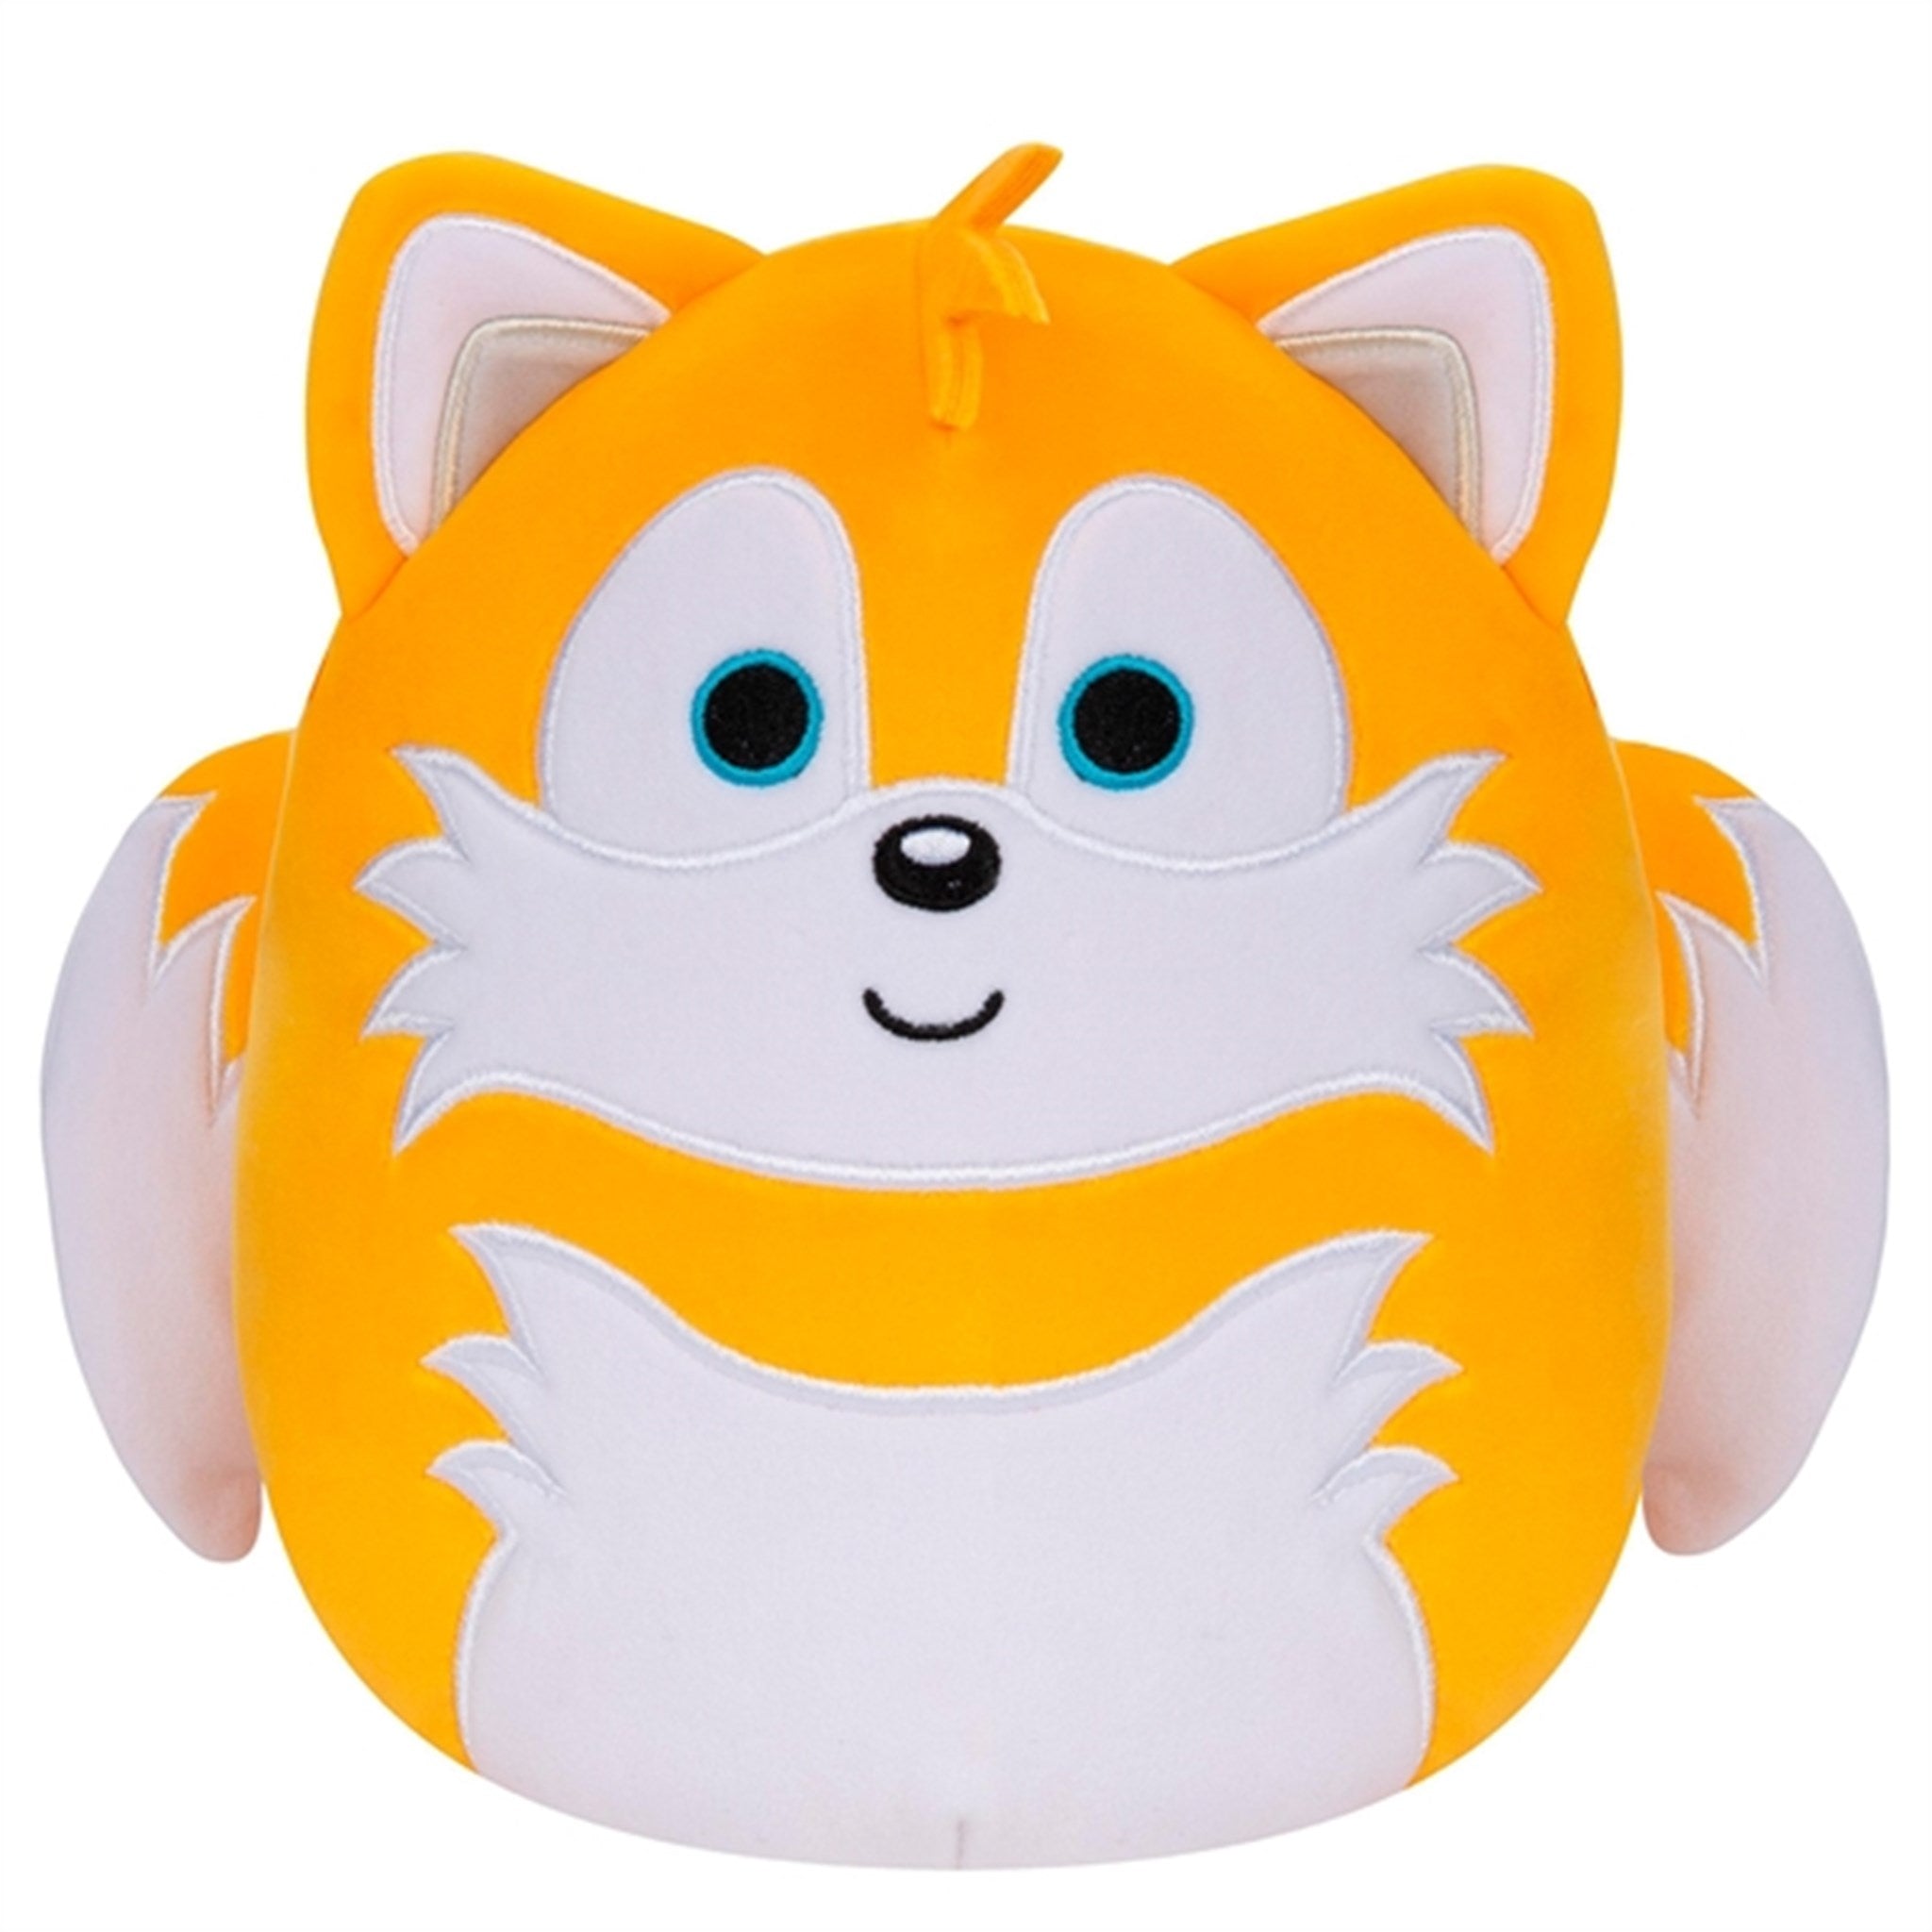 Squishmallows Sonic The Hedgehog Tails 20 cm